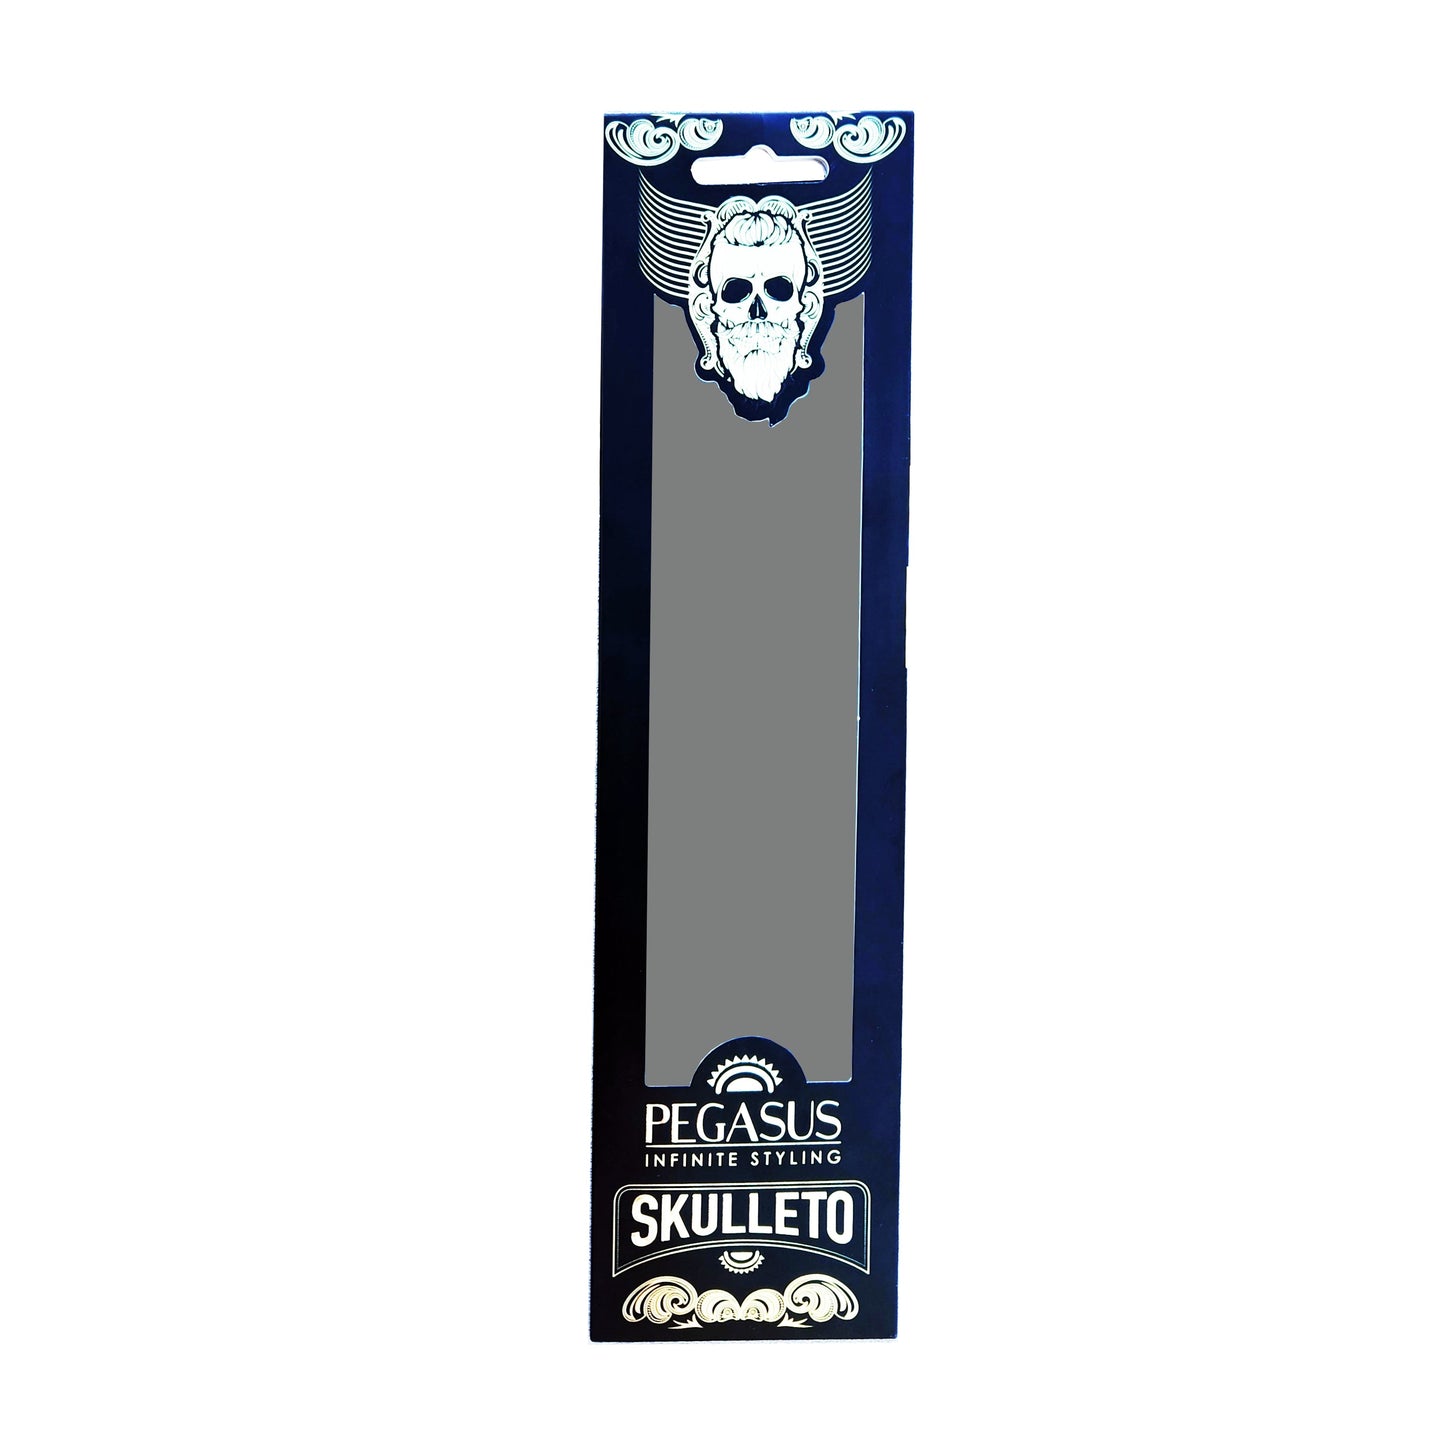 Pegasus Skulleto 303, 6.5in Hard Rubber Heavy Barber Comb, Handmade, Seamless, Smooth Edges, Anti Static, Heat and Chemically Resistant, Wet Hair, Everyday Grooming Comb | Peines de goma dura - Silver